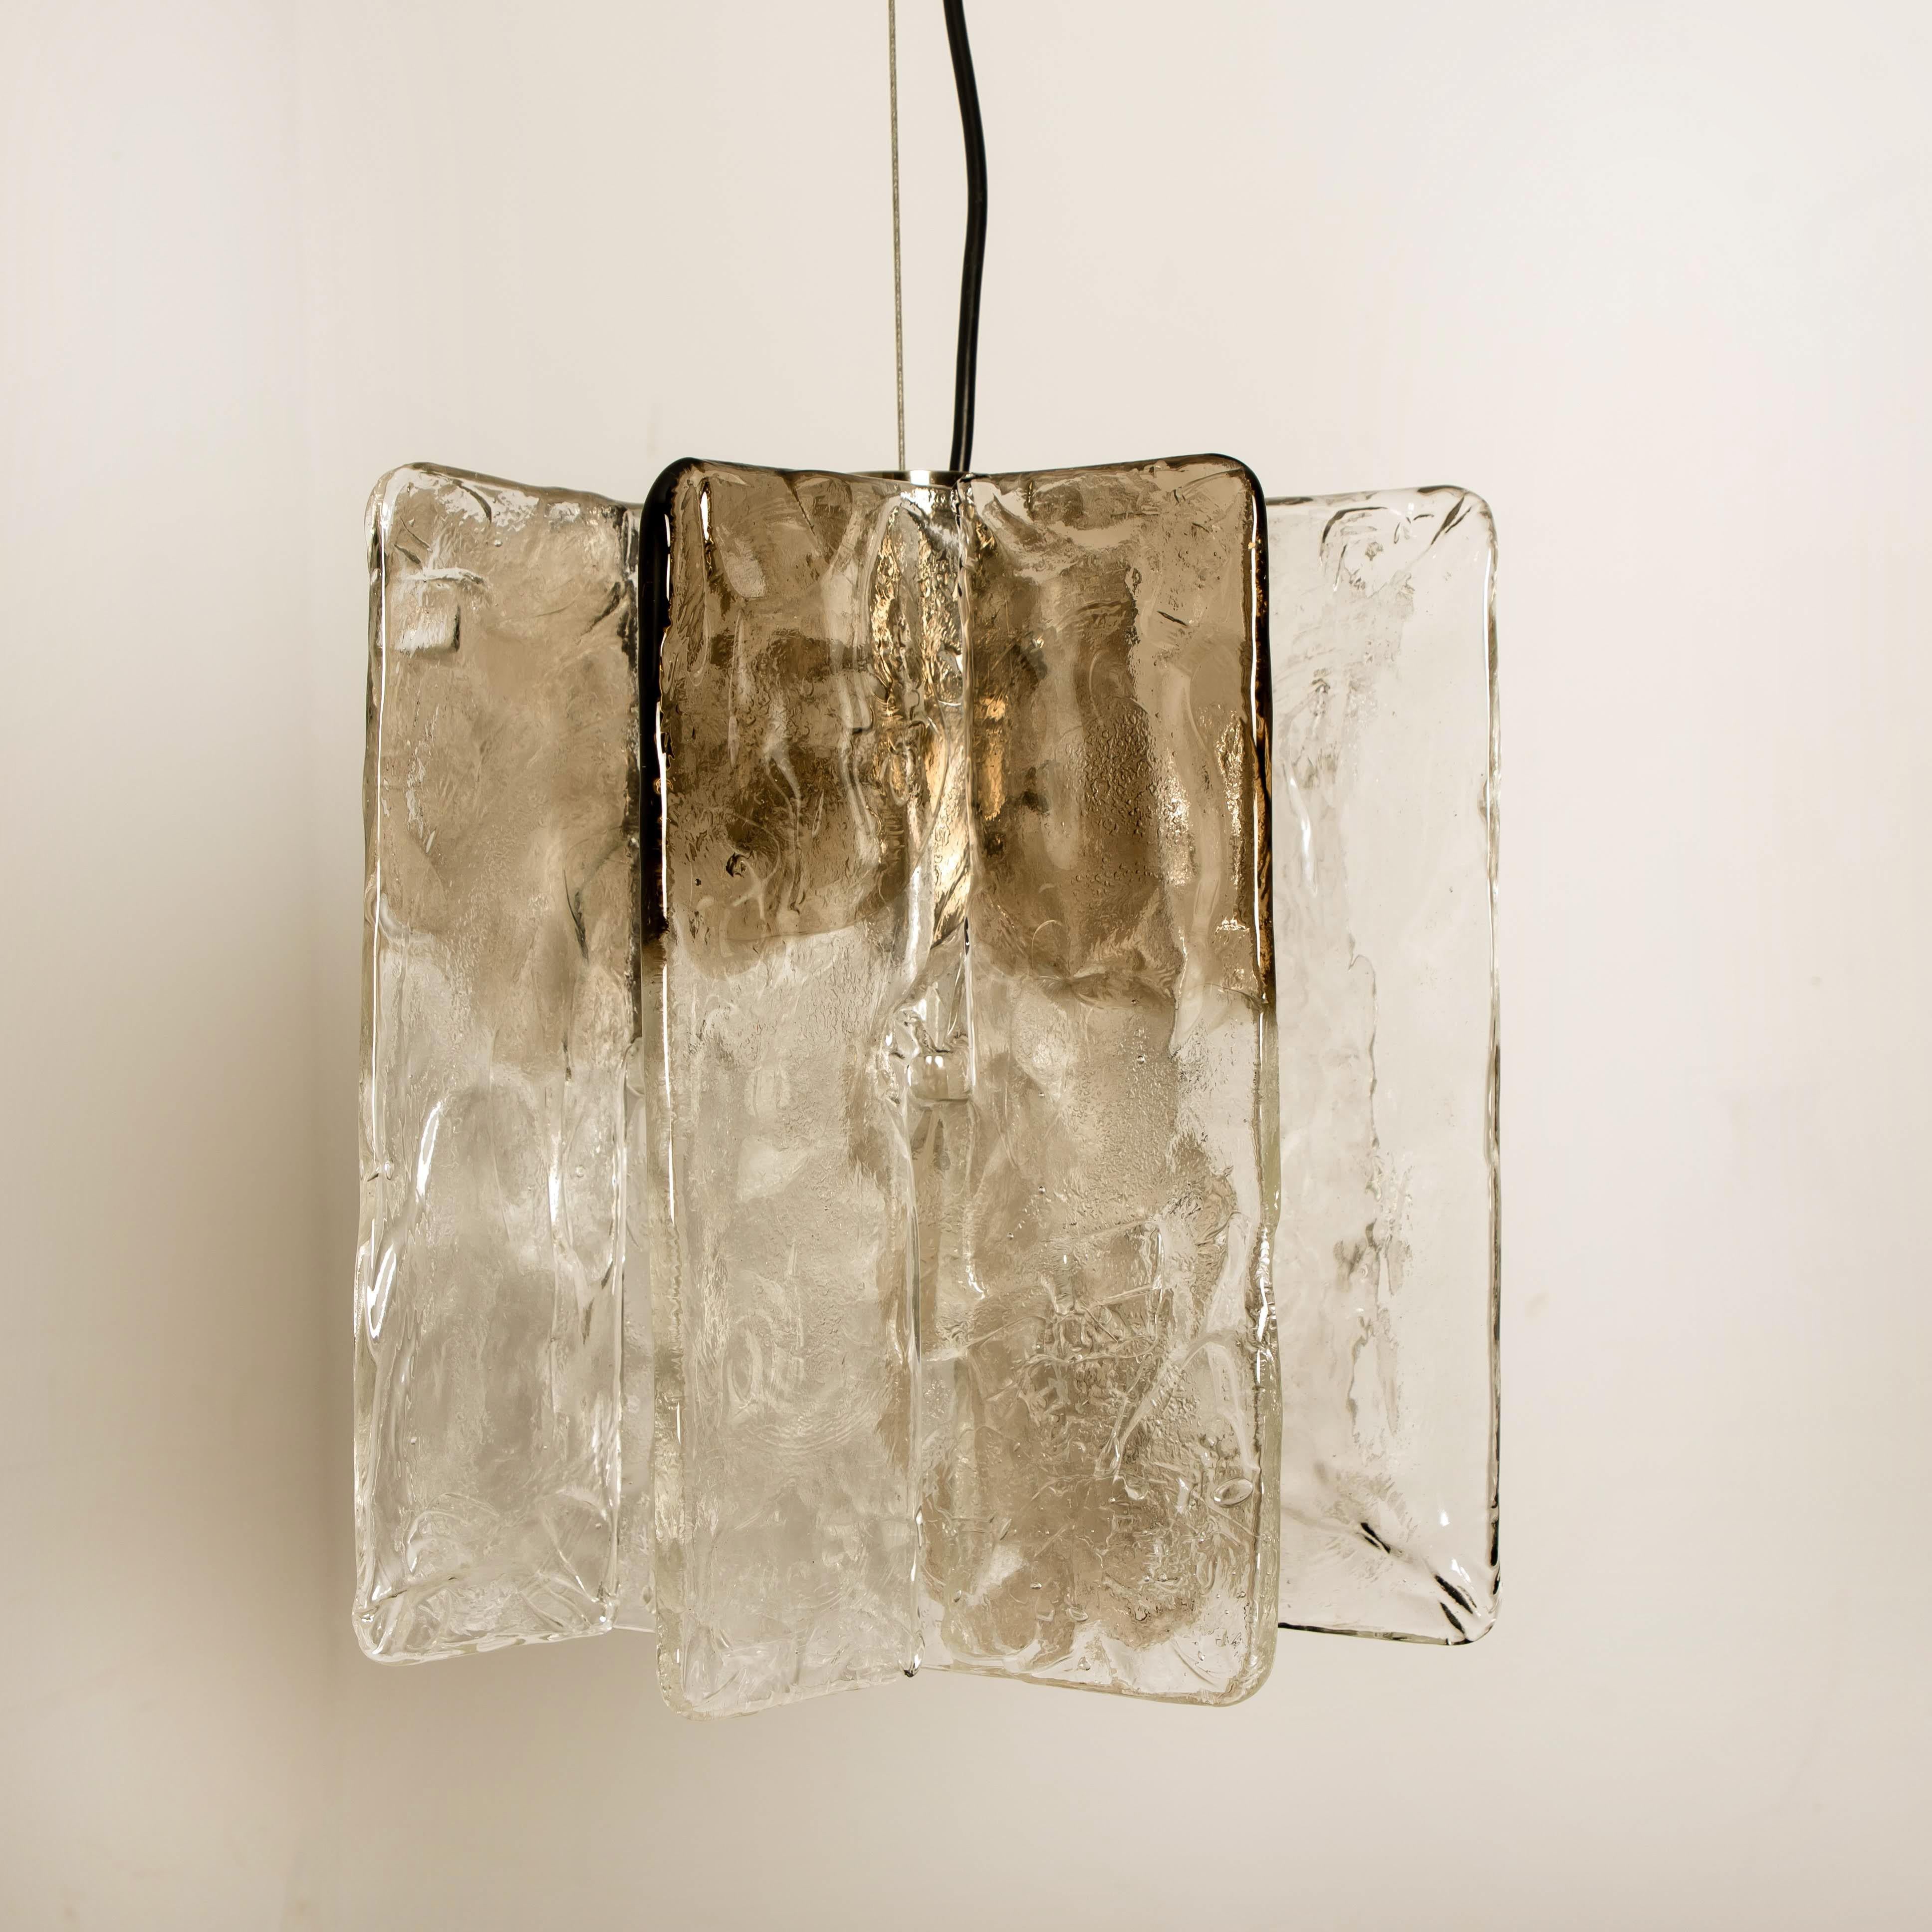 Set of three-light fixtures by Carlo Nason for Mazzega, 1970s. Each light consists of four 0.5 cm thick glass plates in clear and smoked glass, which are mounted on a nickel-plated base. Each lamp has an E27 socket (max 80 Watt).

Please notice